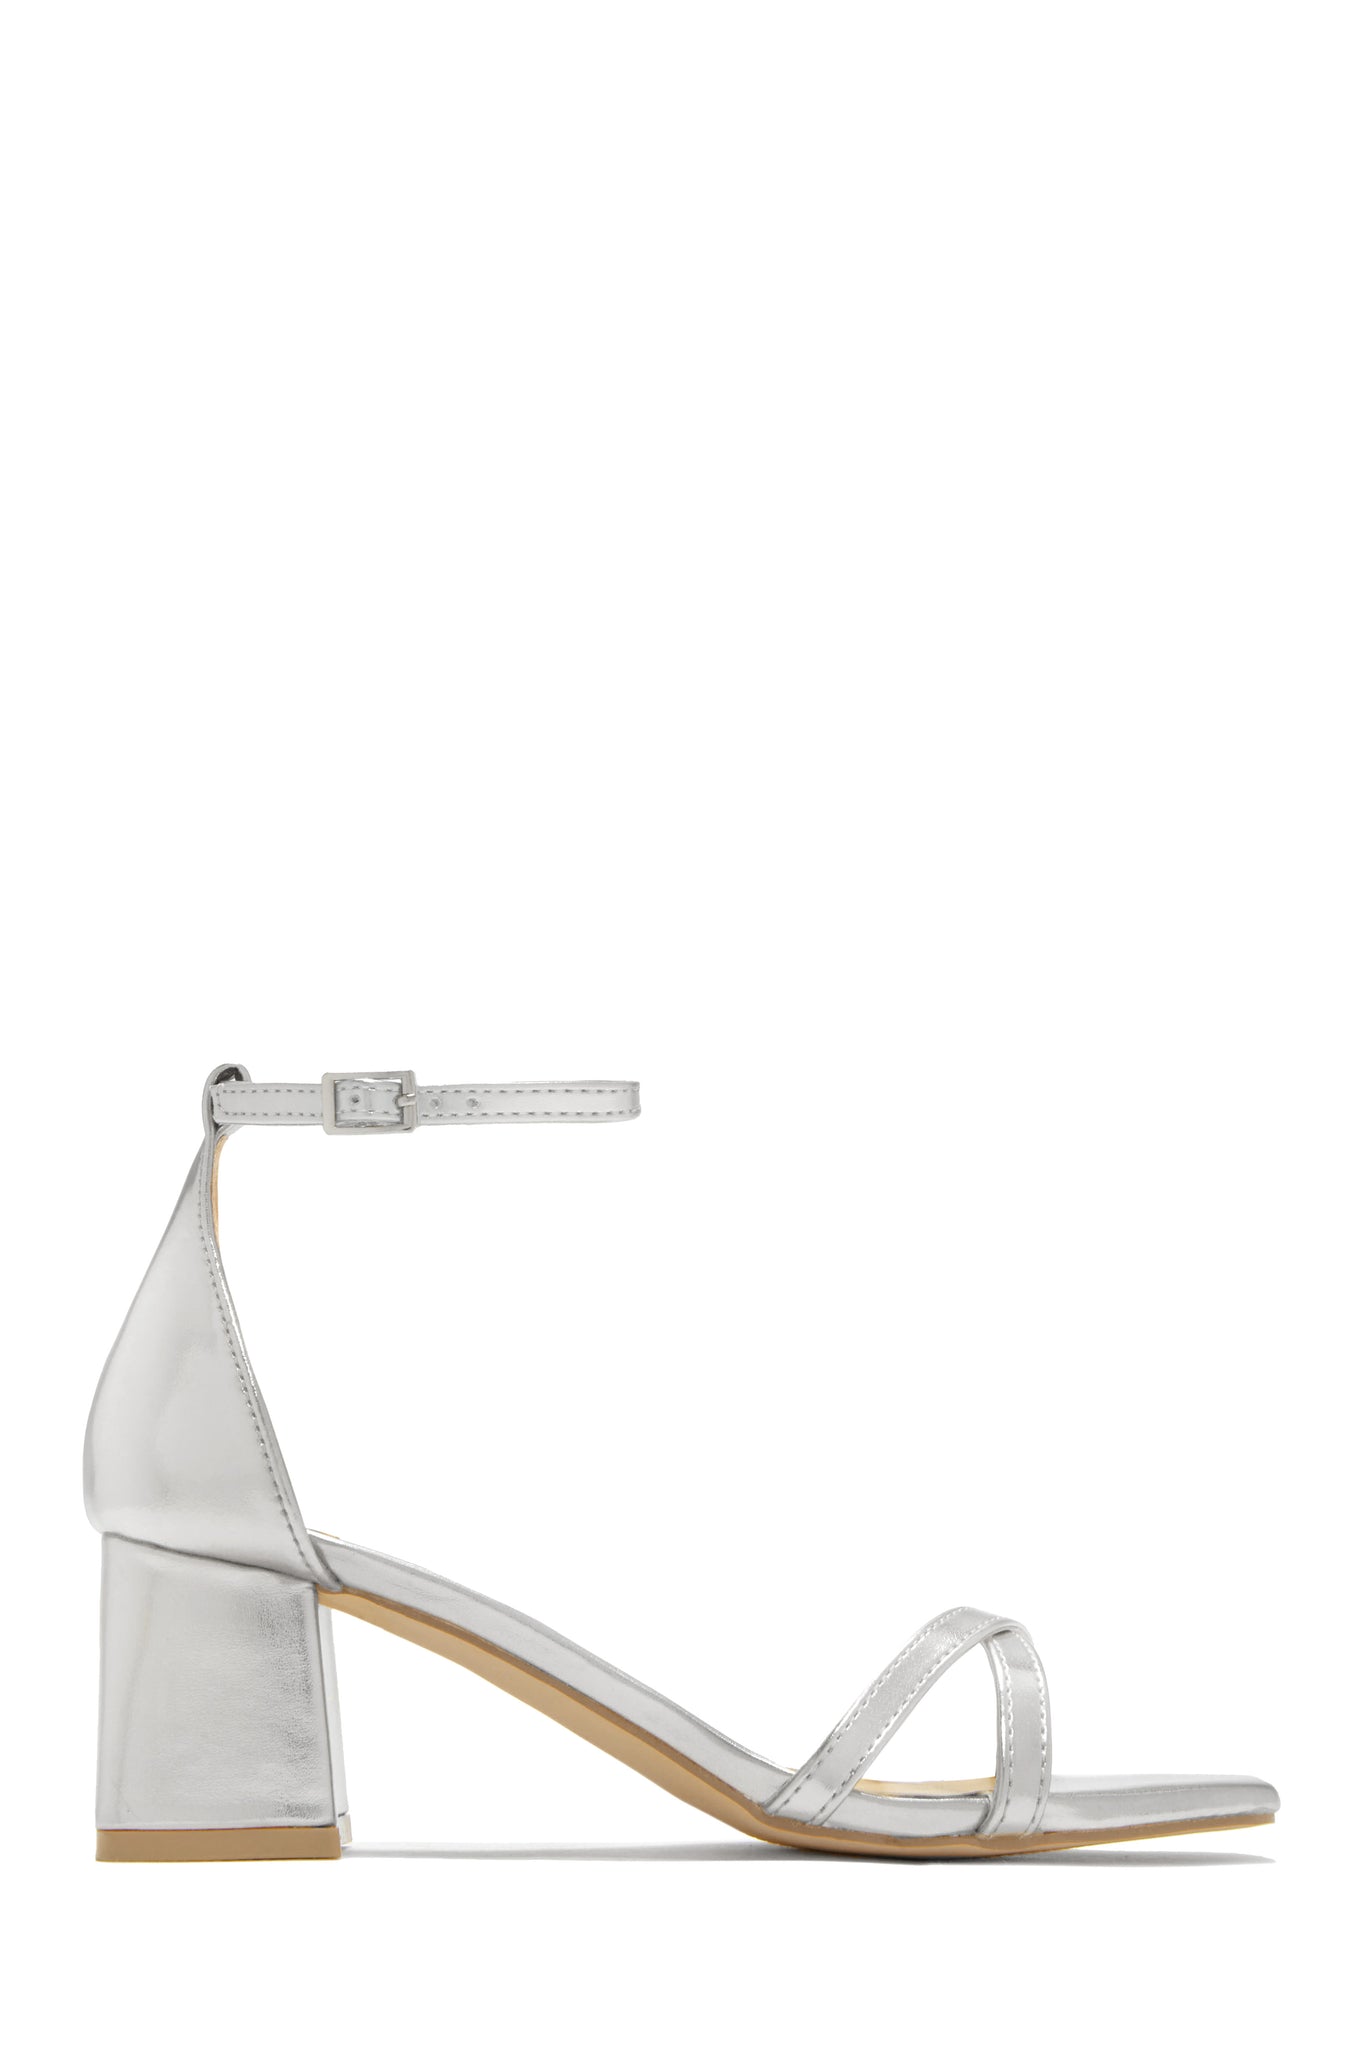 Windsor Simple And Chic Stiletto Heels | Hamilton Place